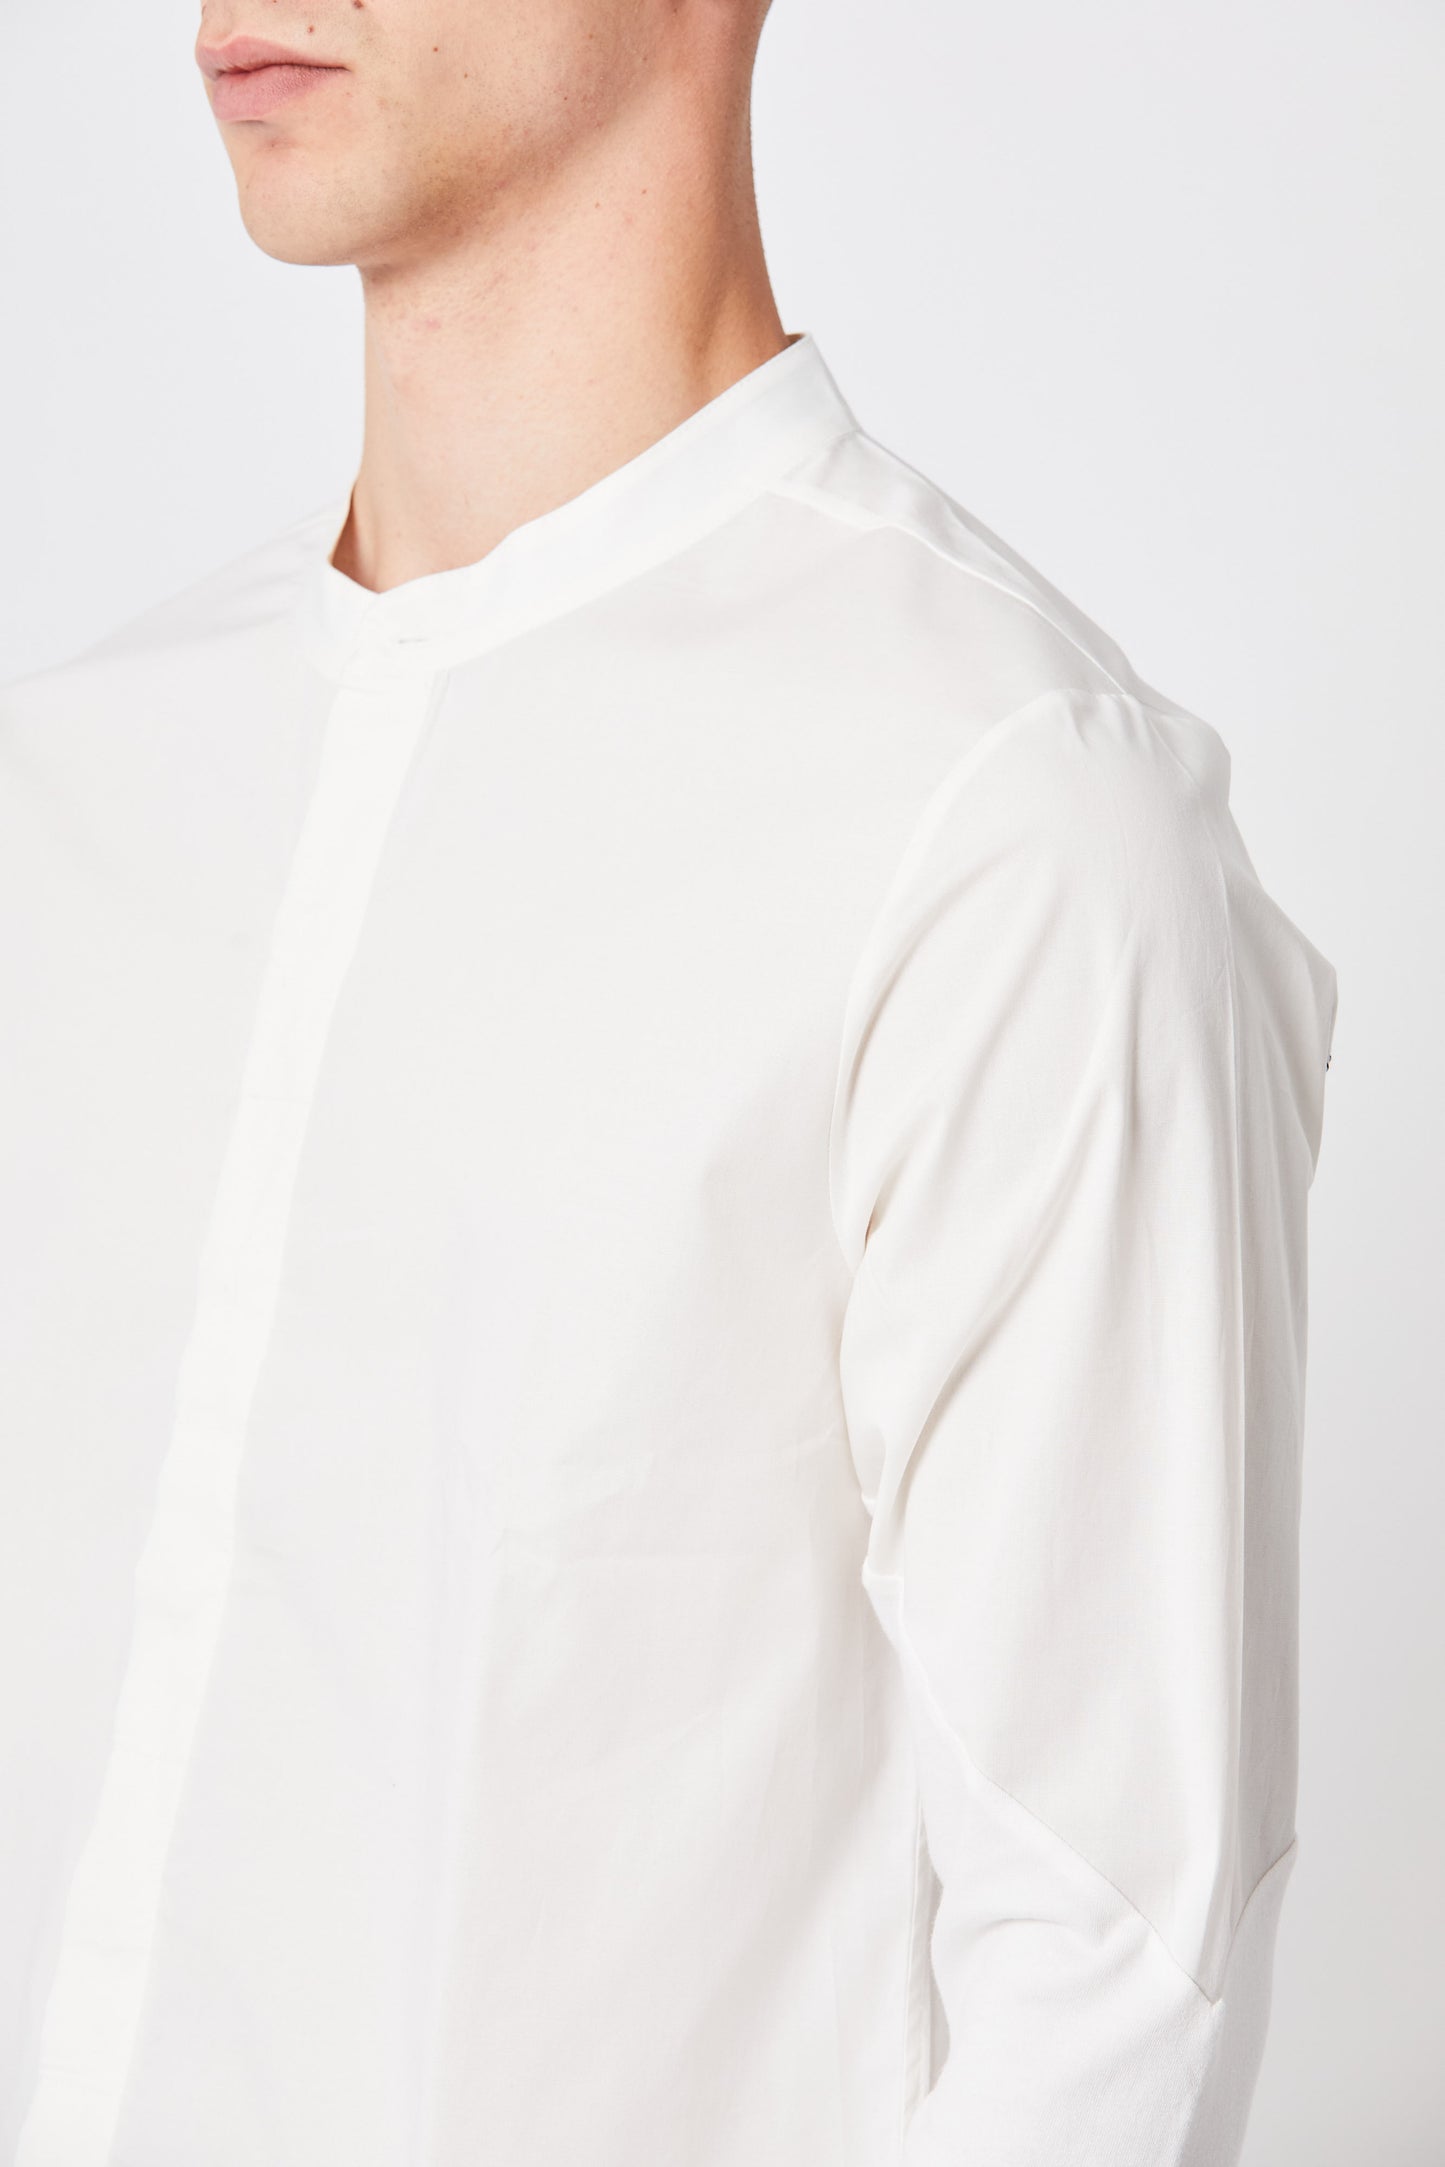 Off White Collarless Long Sleeve Cotton Shirt MH 135